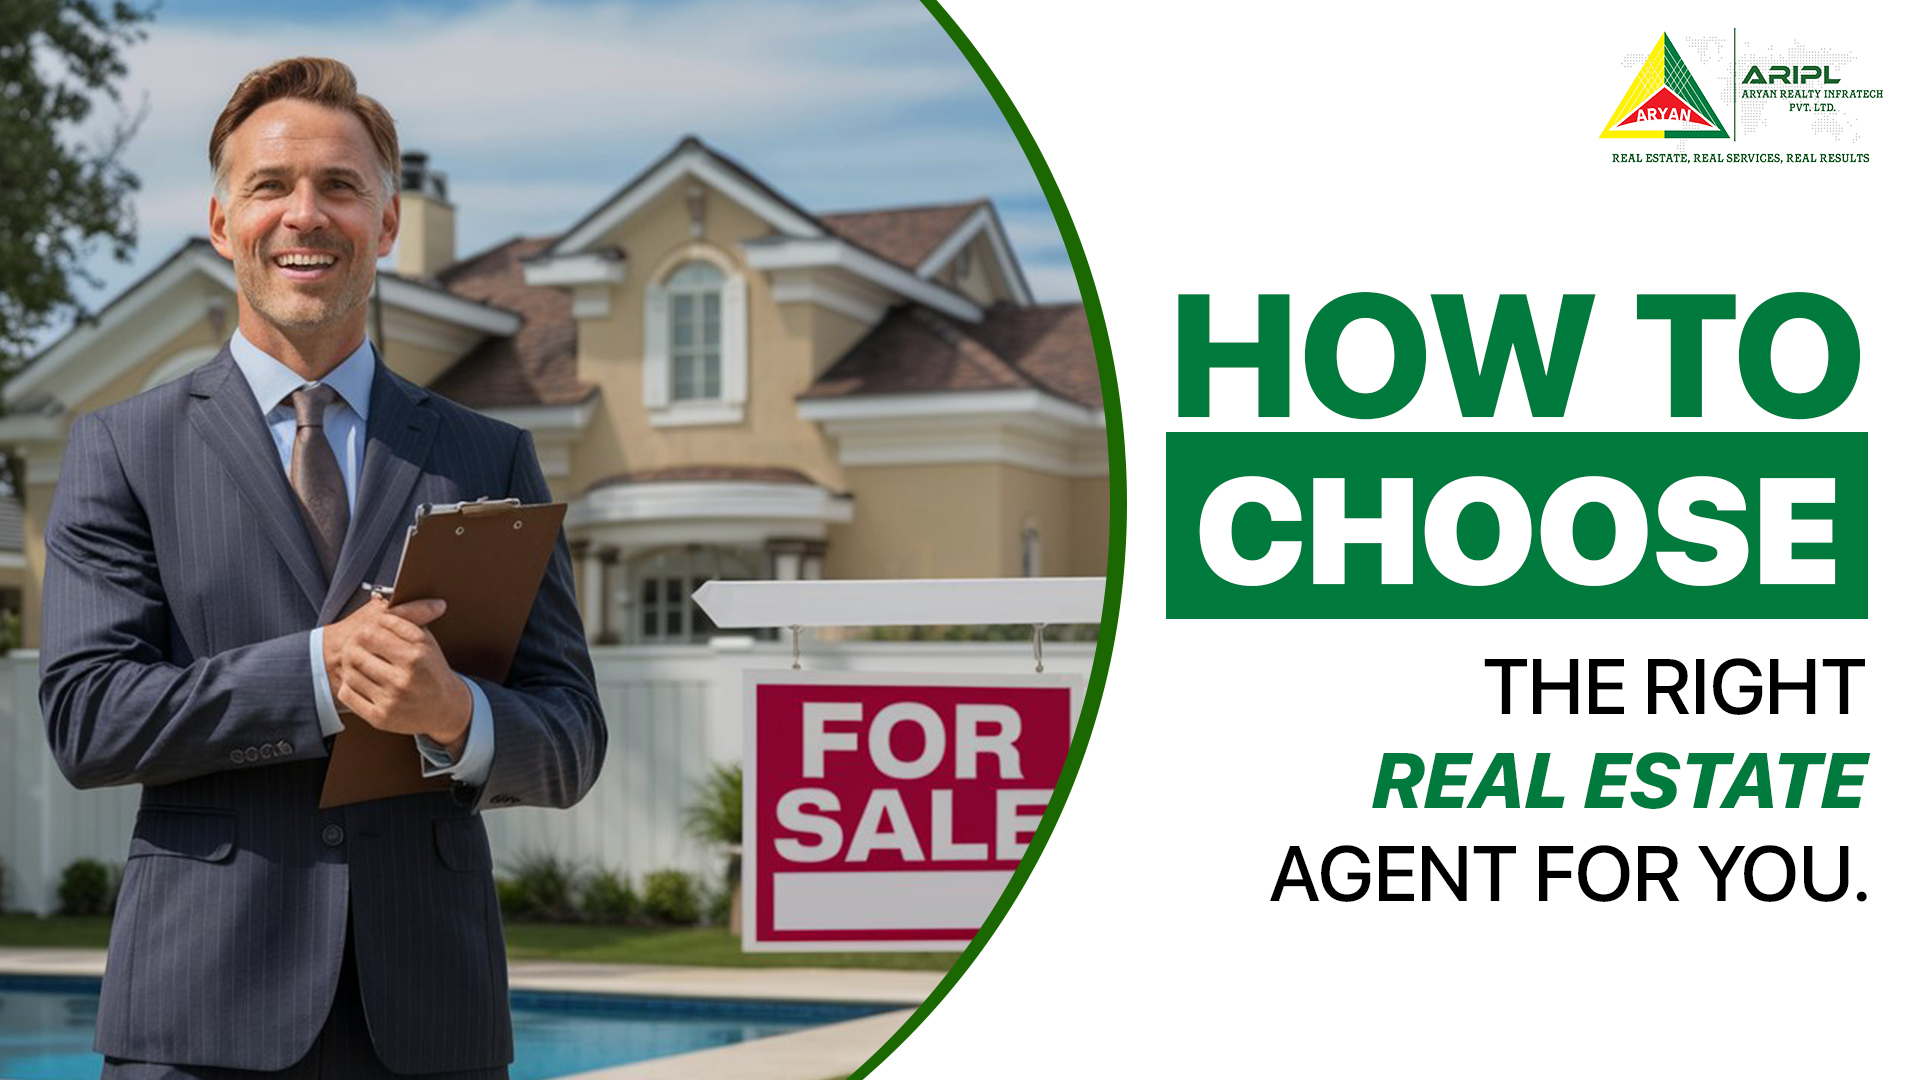 How to Choose the Right Real Estate Agent for You